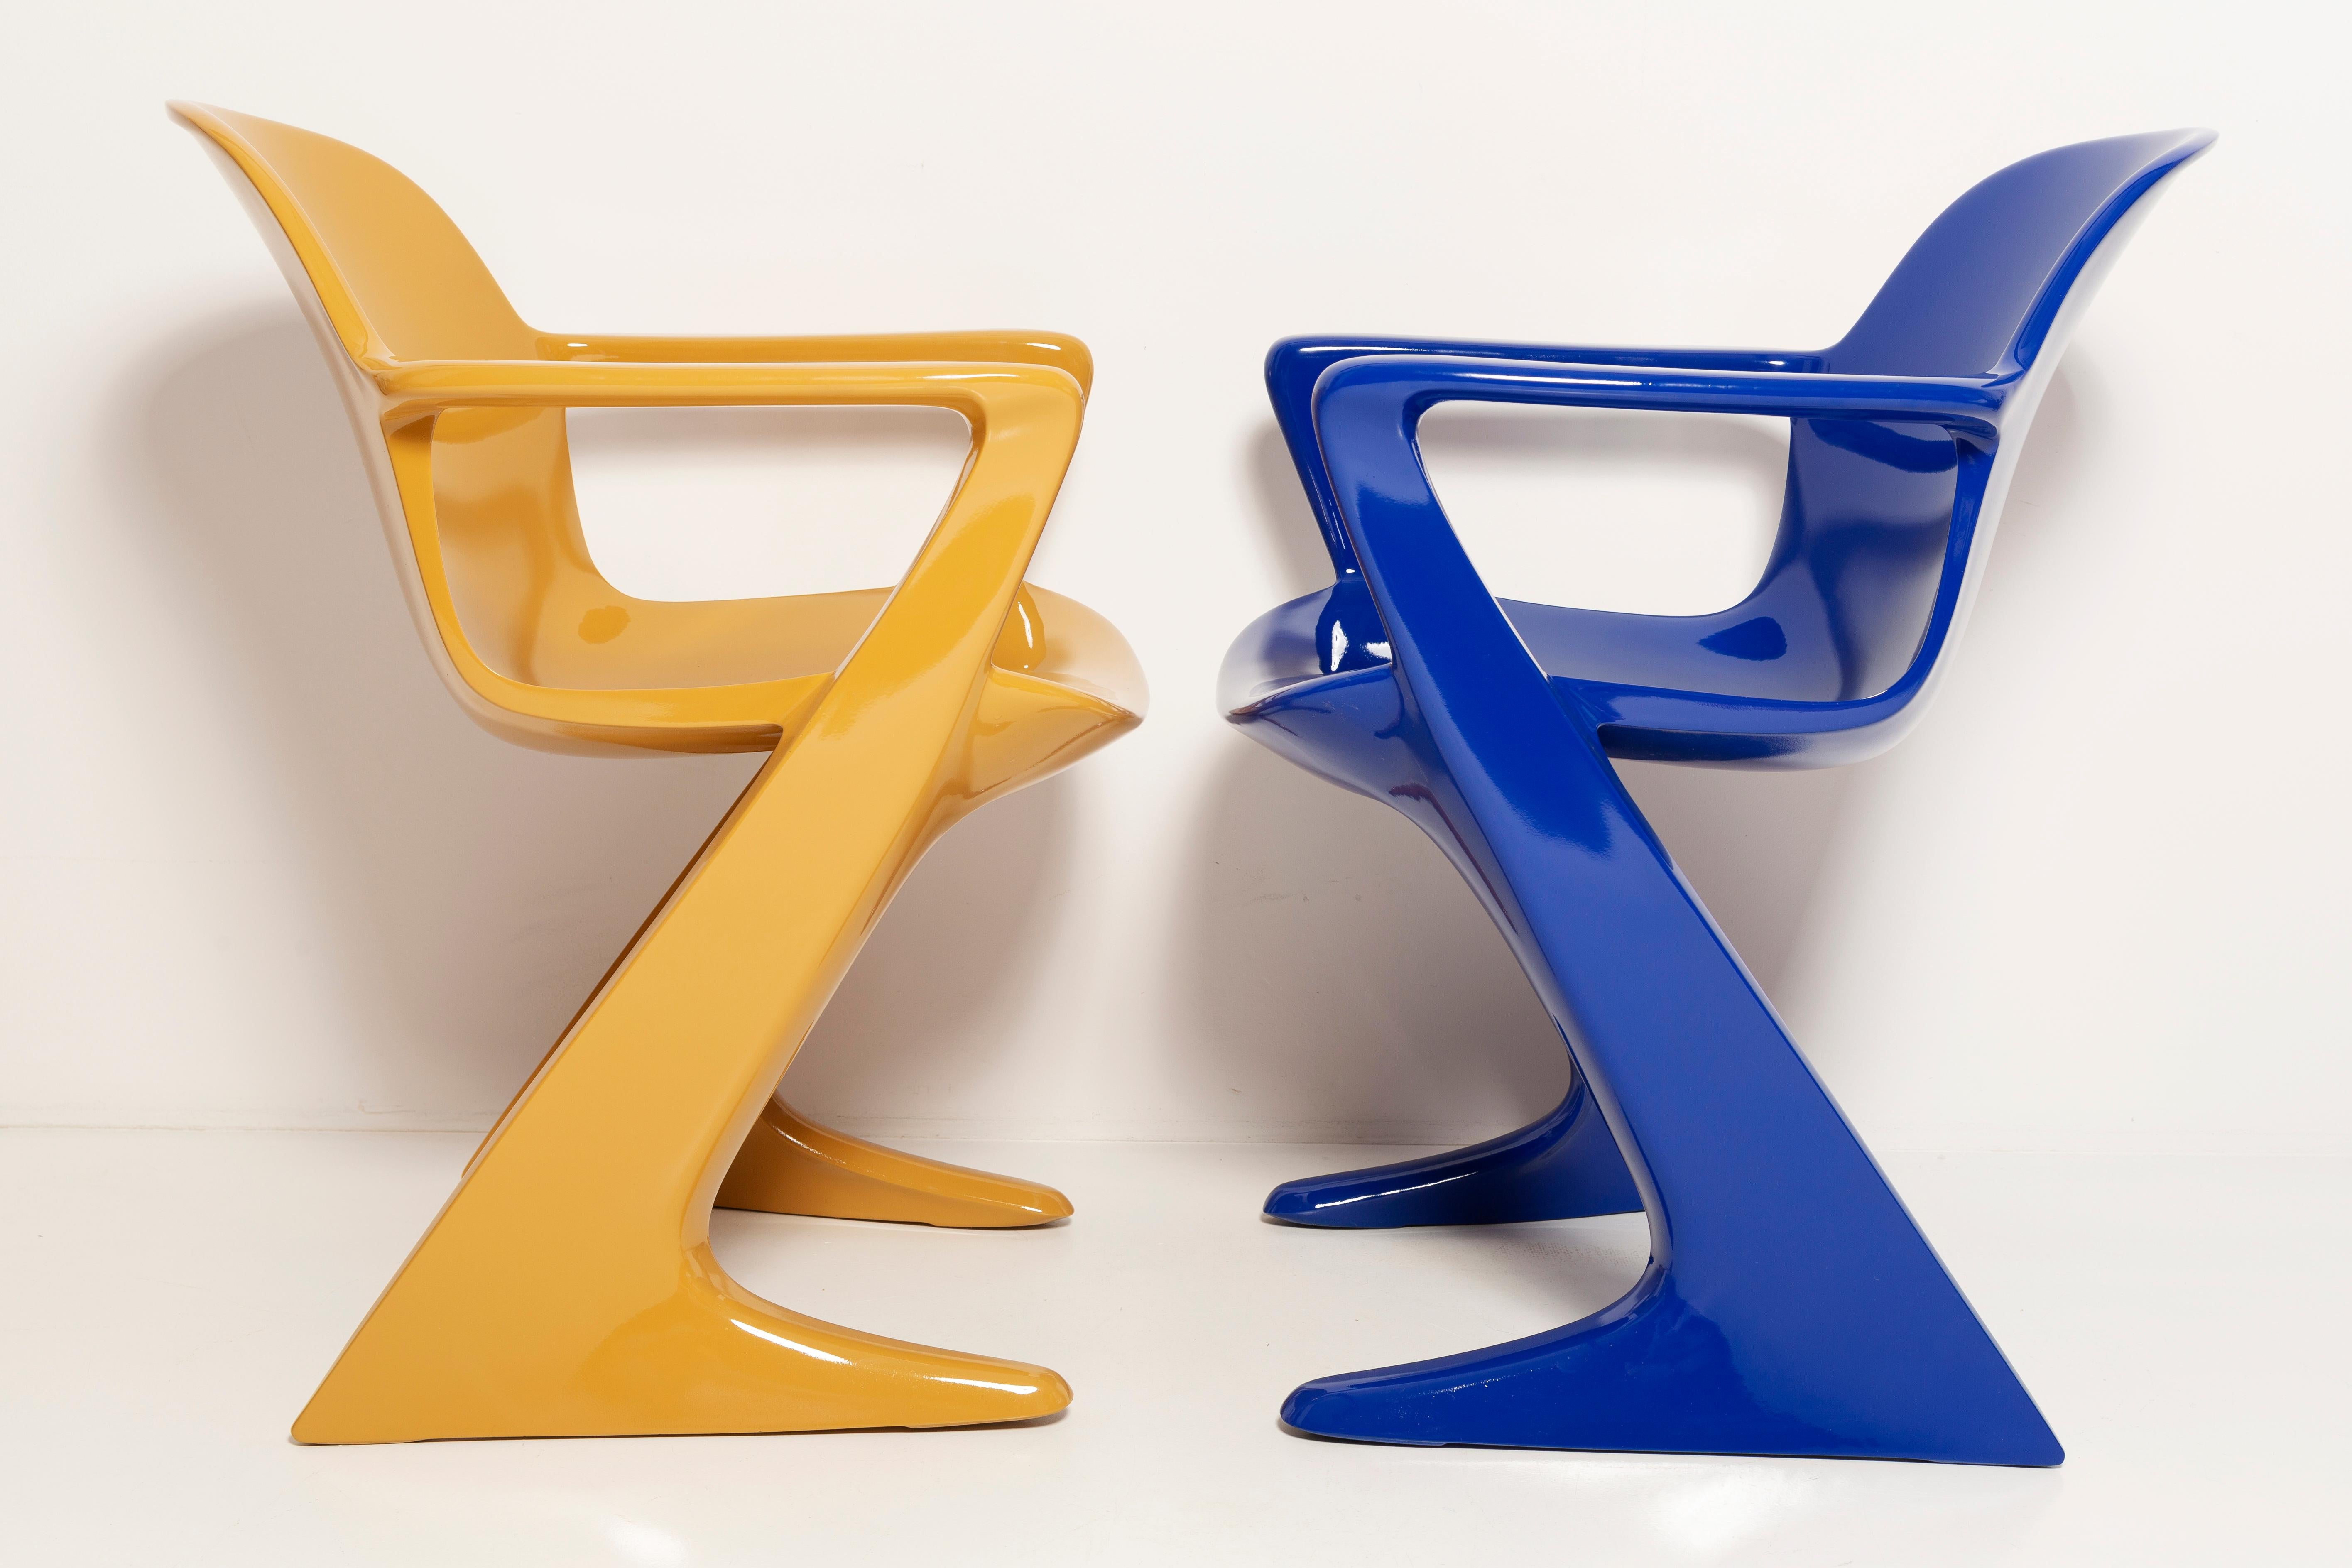 Fiberglass Two Mid-Century Mustard and Blue Kangaroo Chairs Ernst Moeckl, Germany, 1968 For Sale